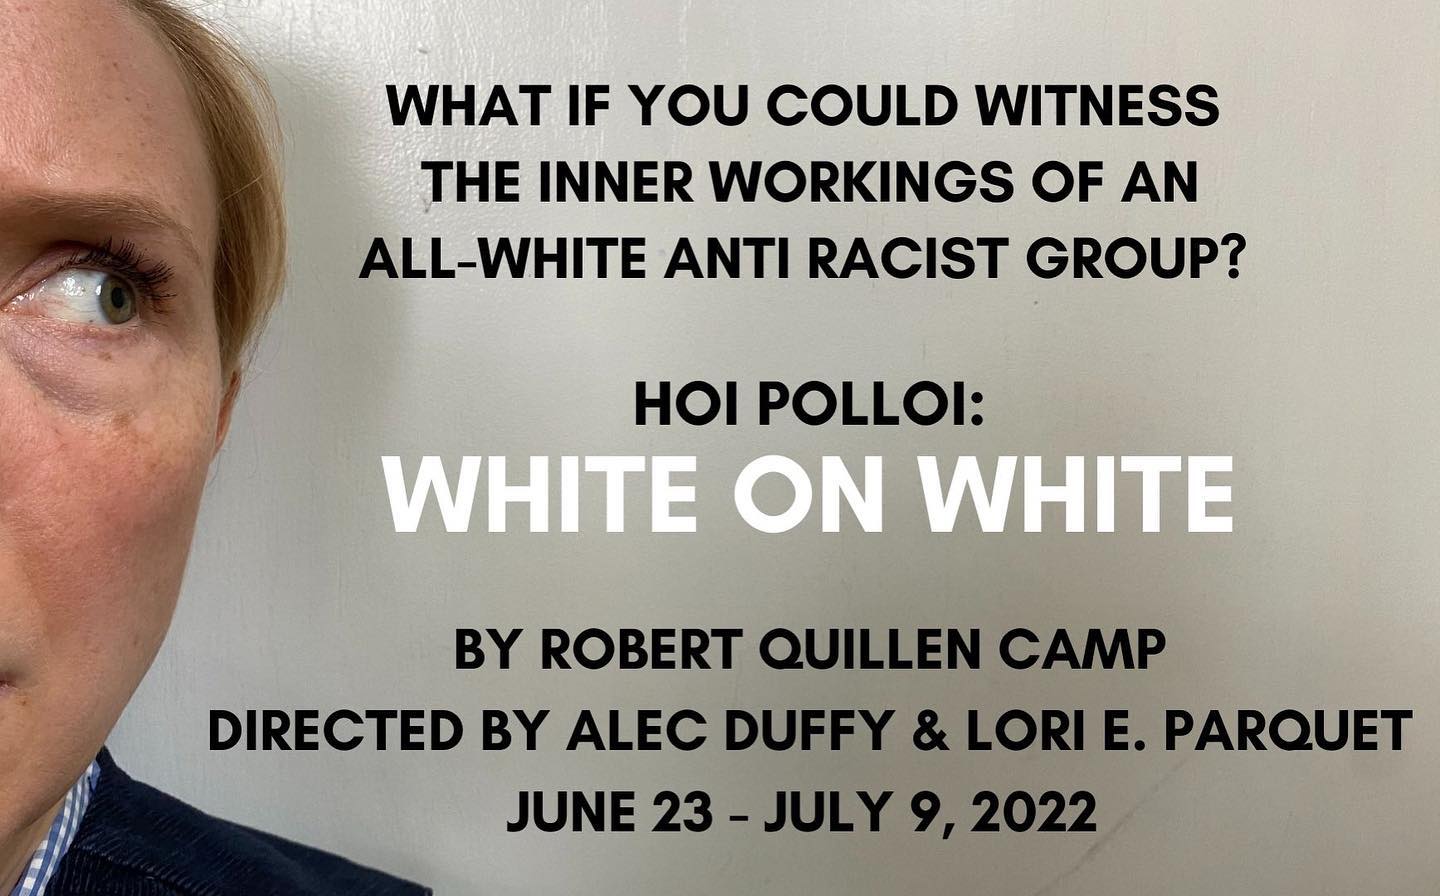 Hoi Polloi presents WHITE ON WHITE, written by Robert Quillen Camp, co-directed by Alec Duffy & Lori Elizabeth Parquet, at JACK Brooklyn